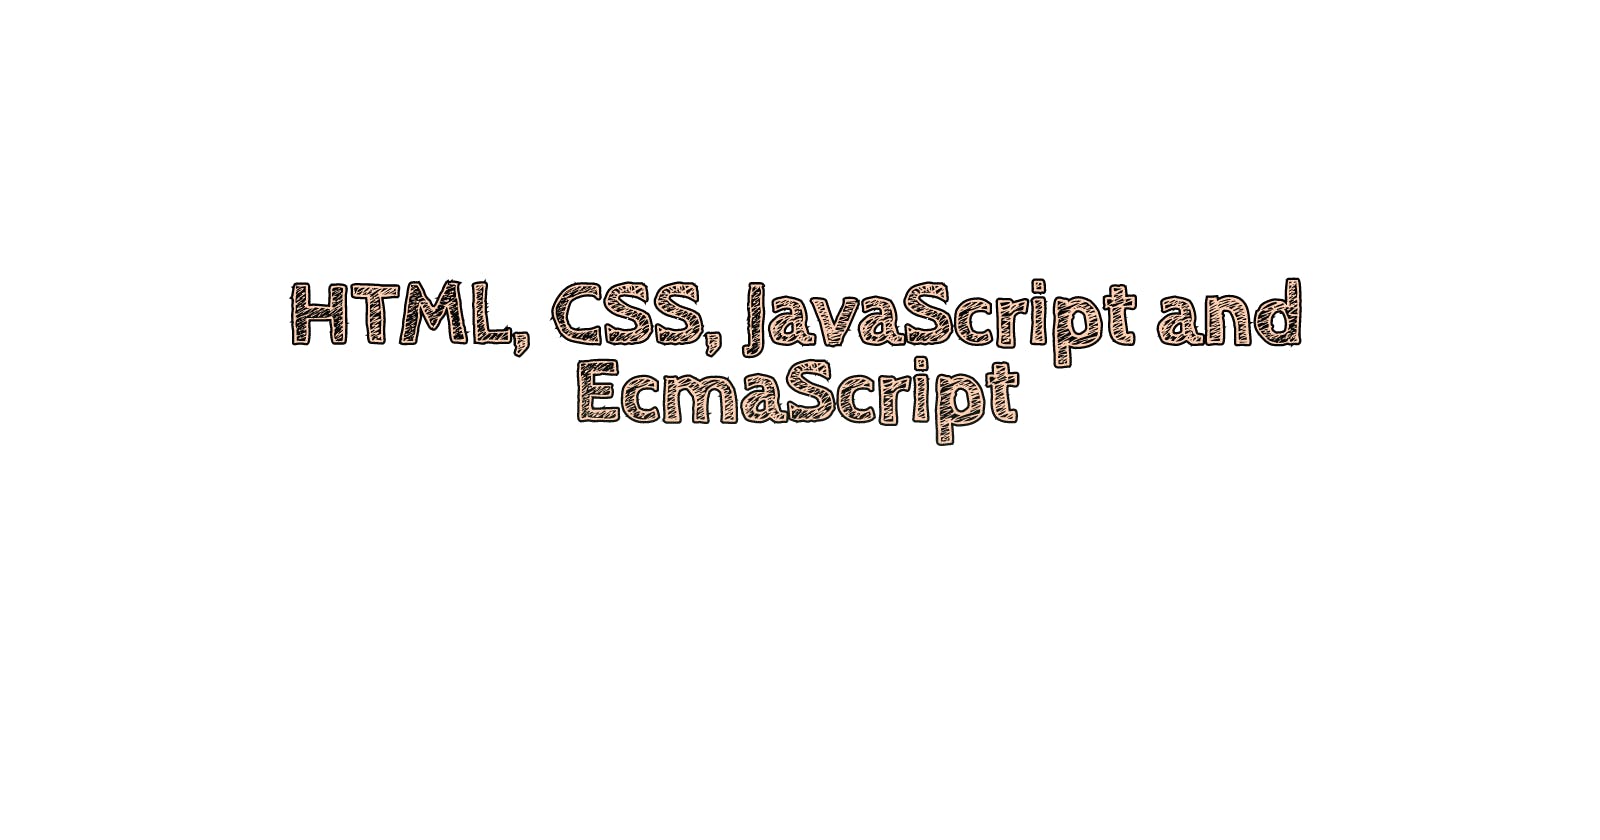 Overview on HTML, CSS and JavaScript